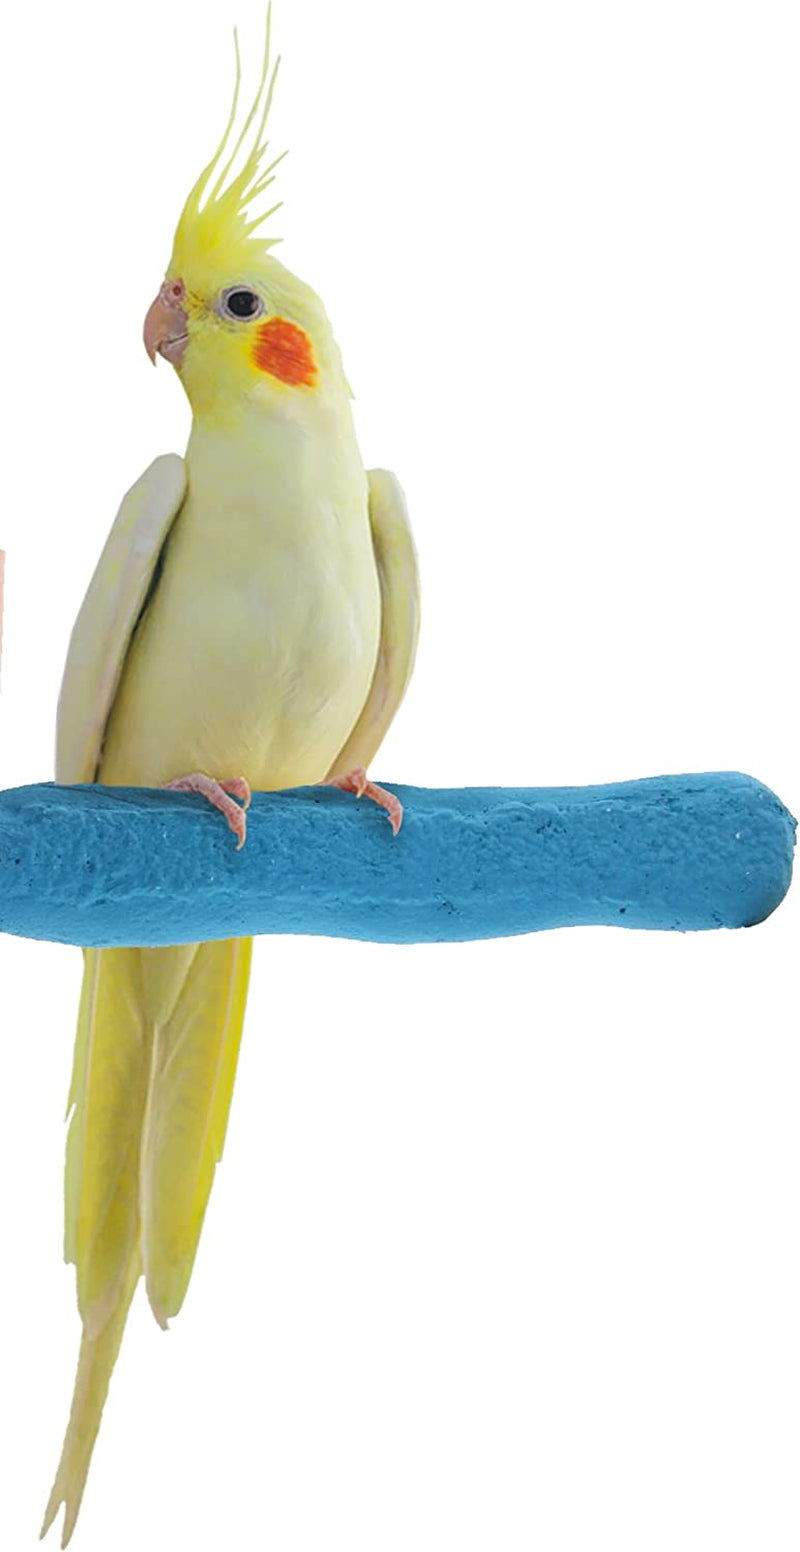 Sweet Feet and Beak Comfort Grip Safety Perch for Bird Cages - Patented Pumice Perch for Birds to Keep Nails and Beaks in Top Condition - Safe Easy to Install Bird Cage Accessories - M 8.5" Animals & Pet Supplies > Pet Supplies > Bird Supplies Sweet Feet and Beak Blue X-Small 4.5" 